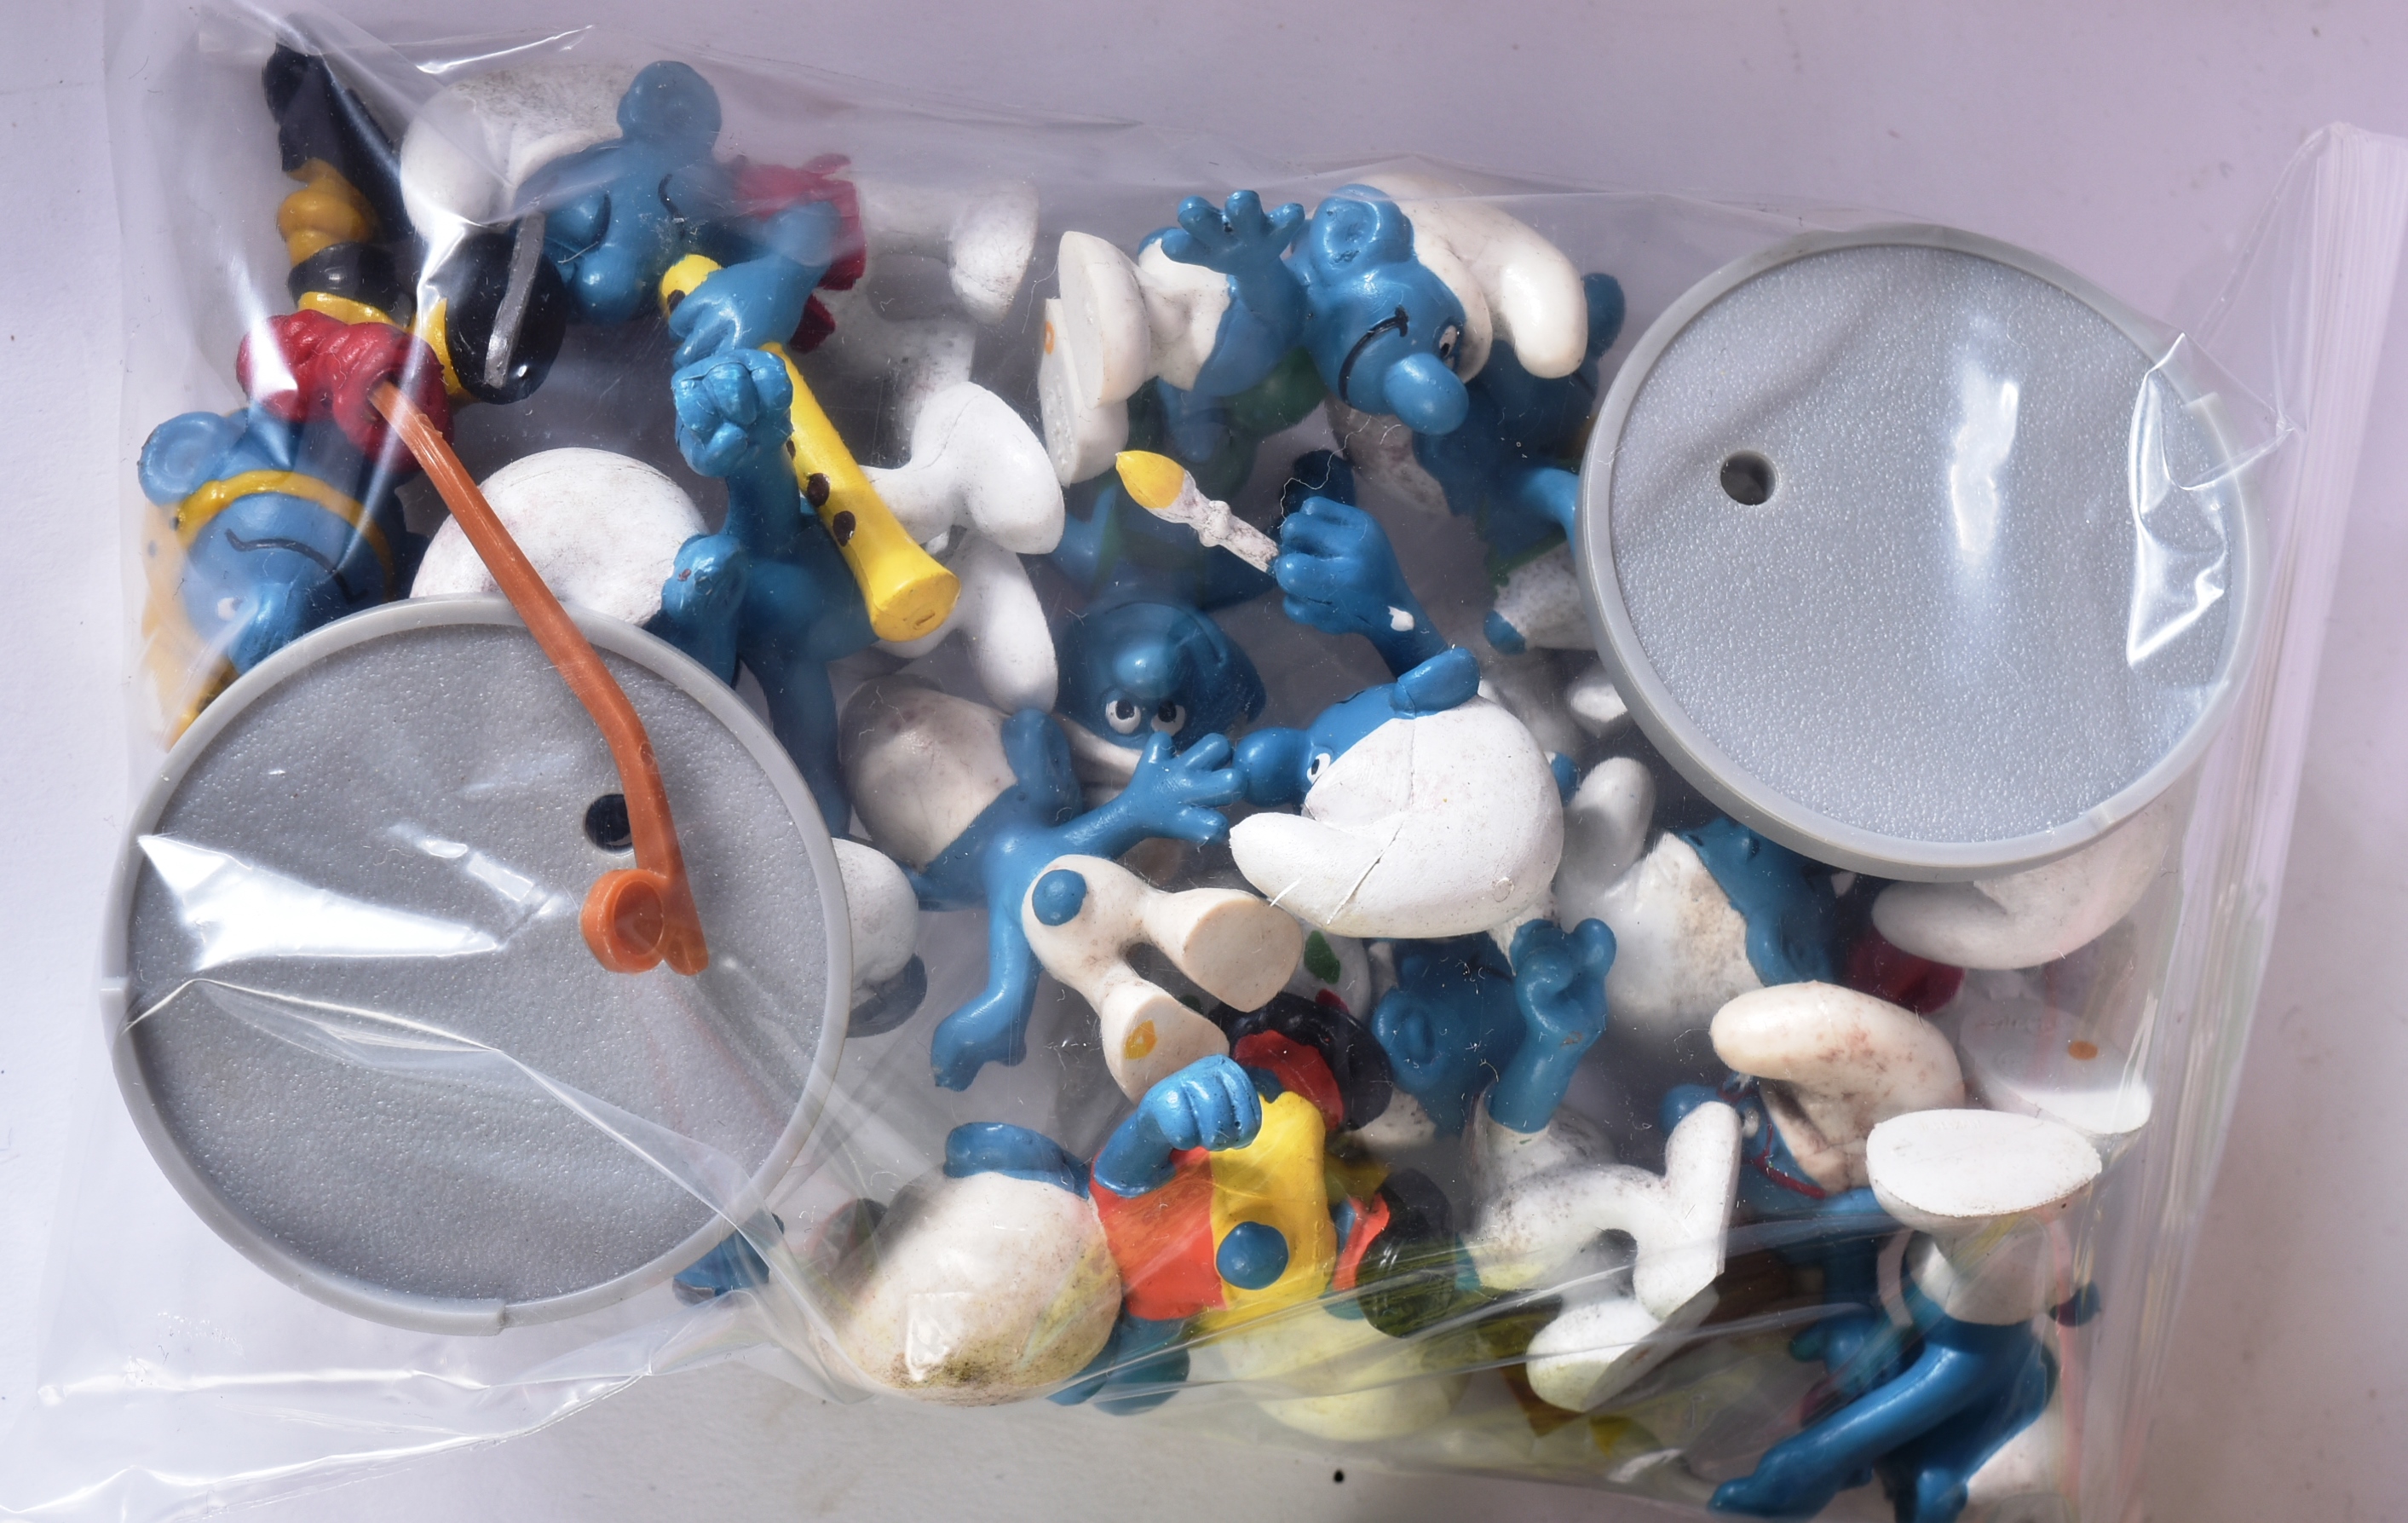 SMURFS - LARGE COLLECTION OF VINTAGE PEYO / SCHLEICH SMURFS - Image 3 of 7